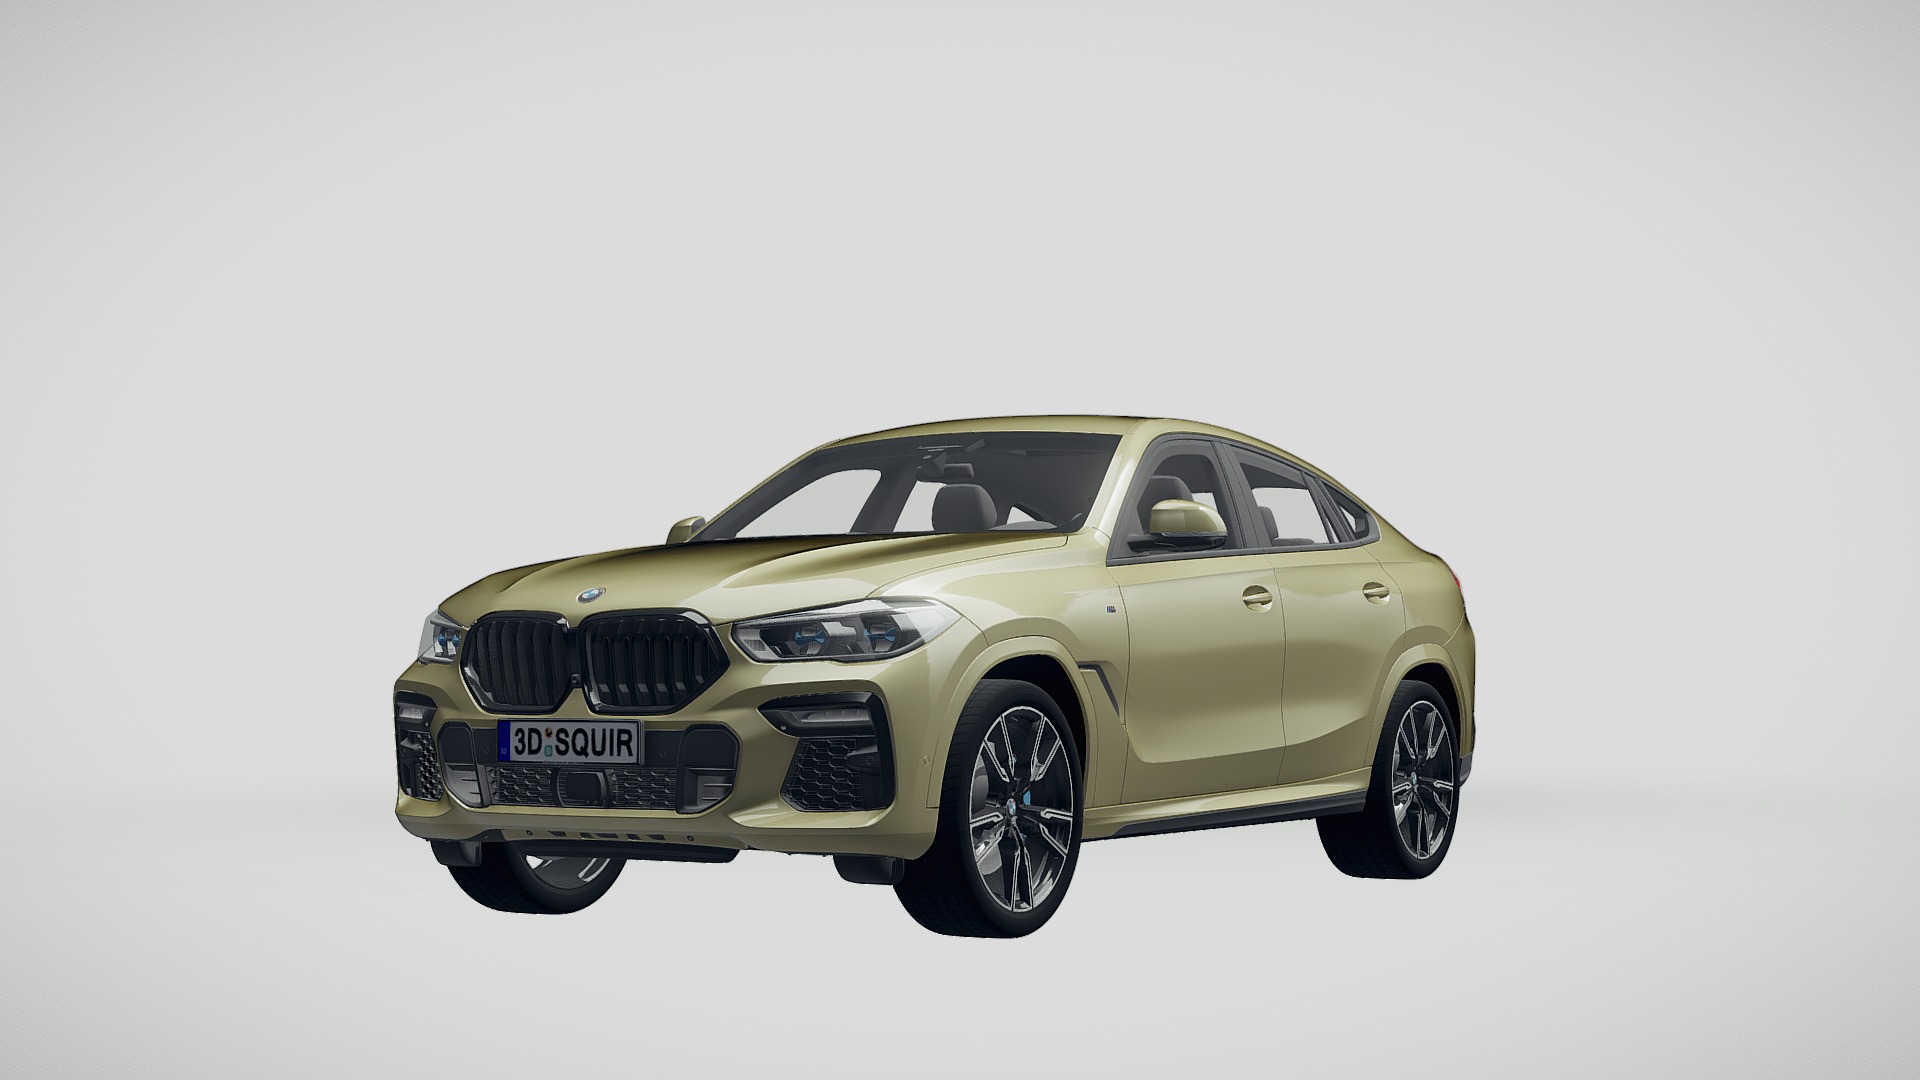 3D model BMW X6 M50i 2020 - This is a 3D model of the BMW X6 M50i 2020. The 3D model is about a car parked on a white background.